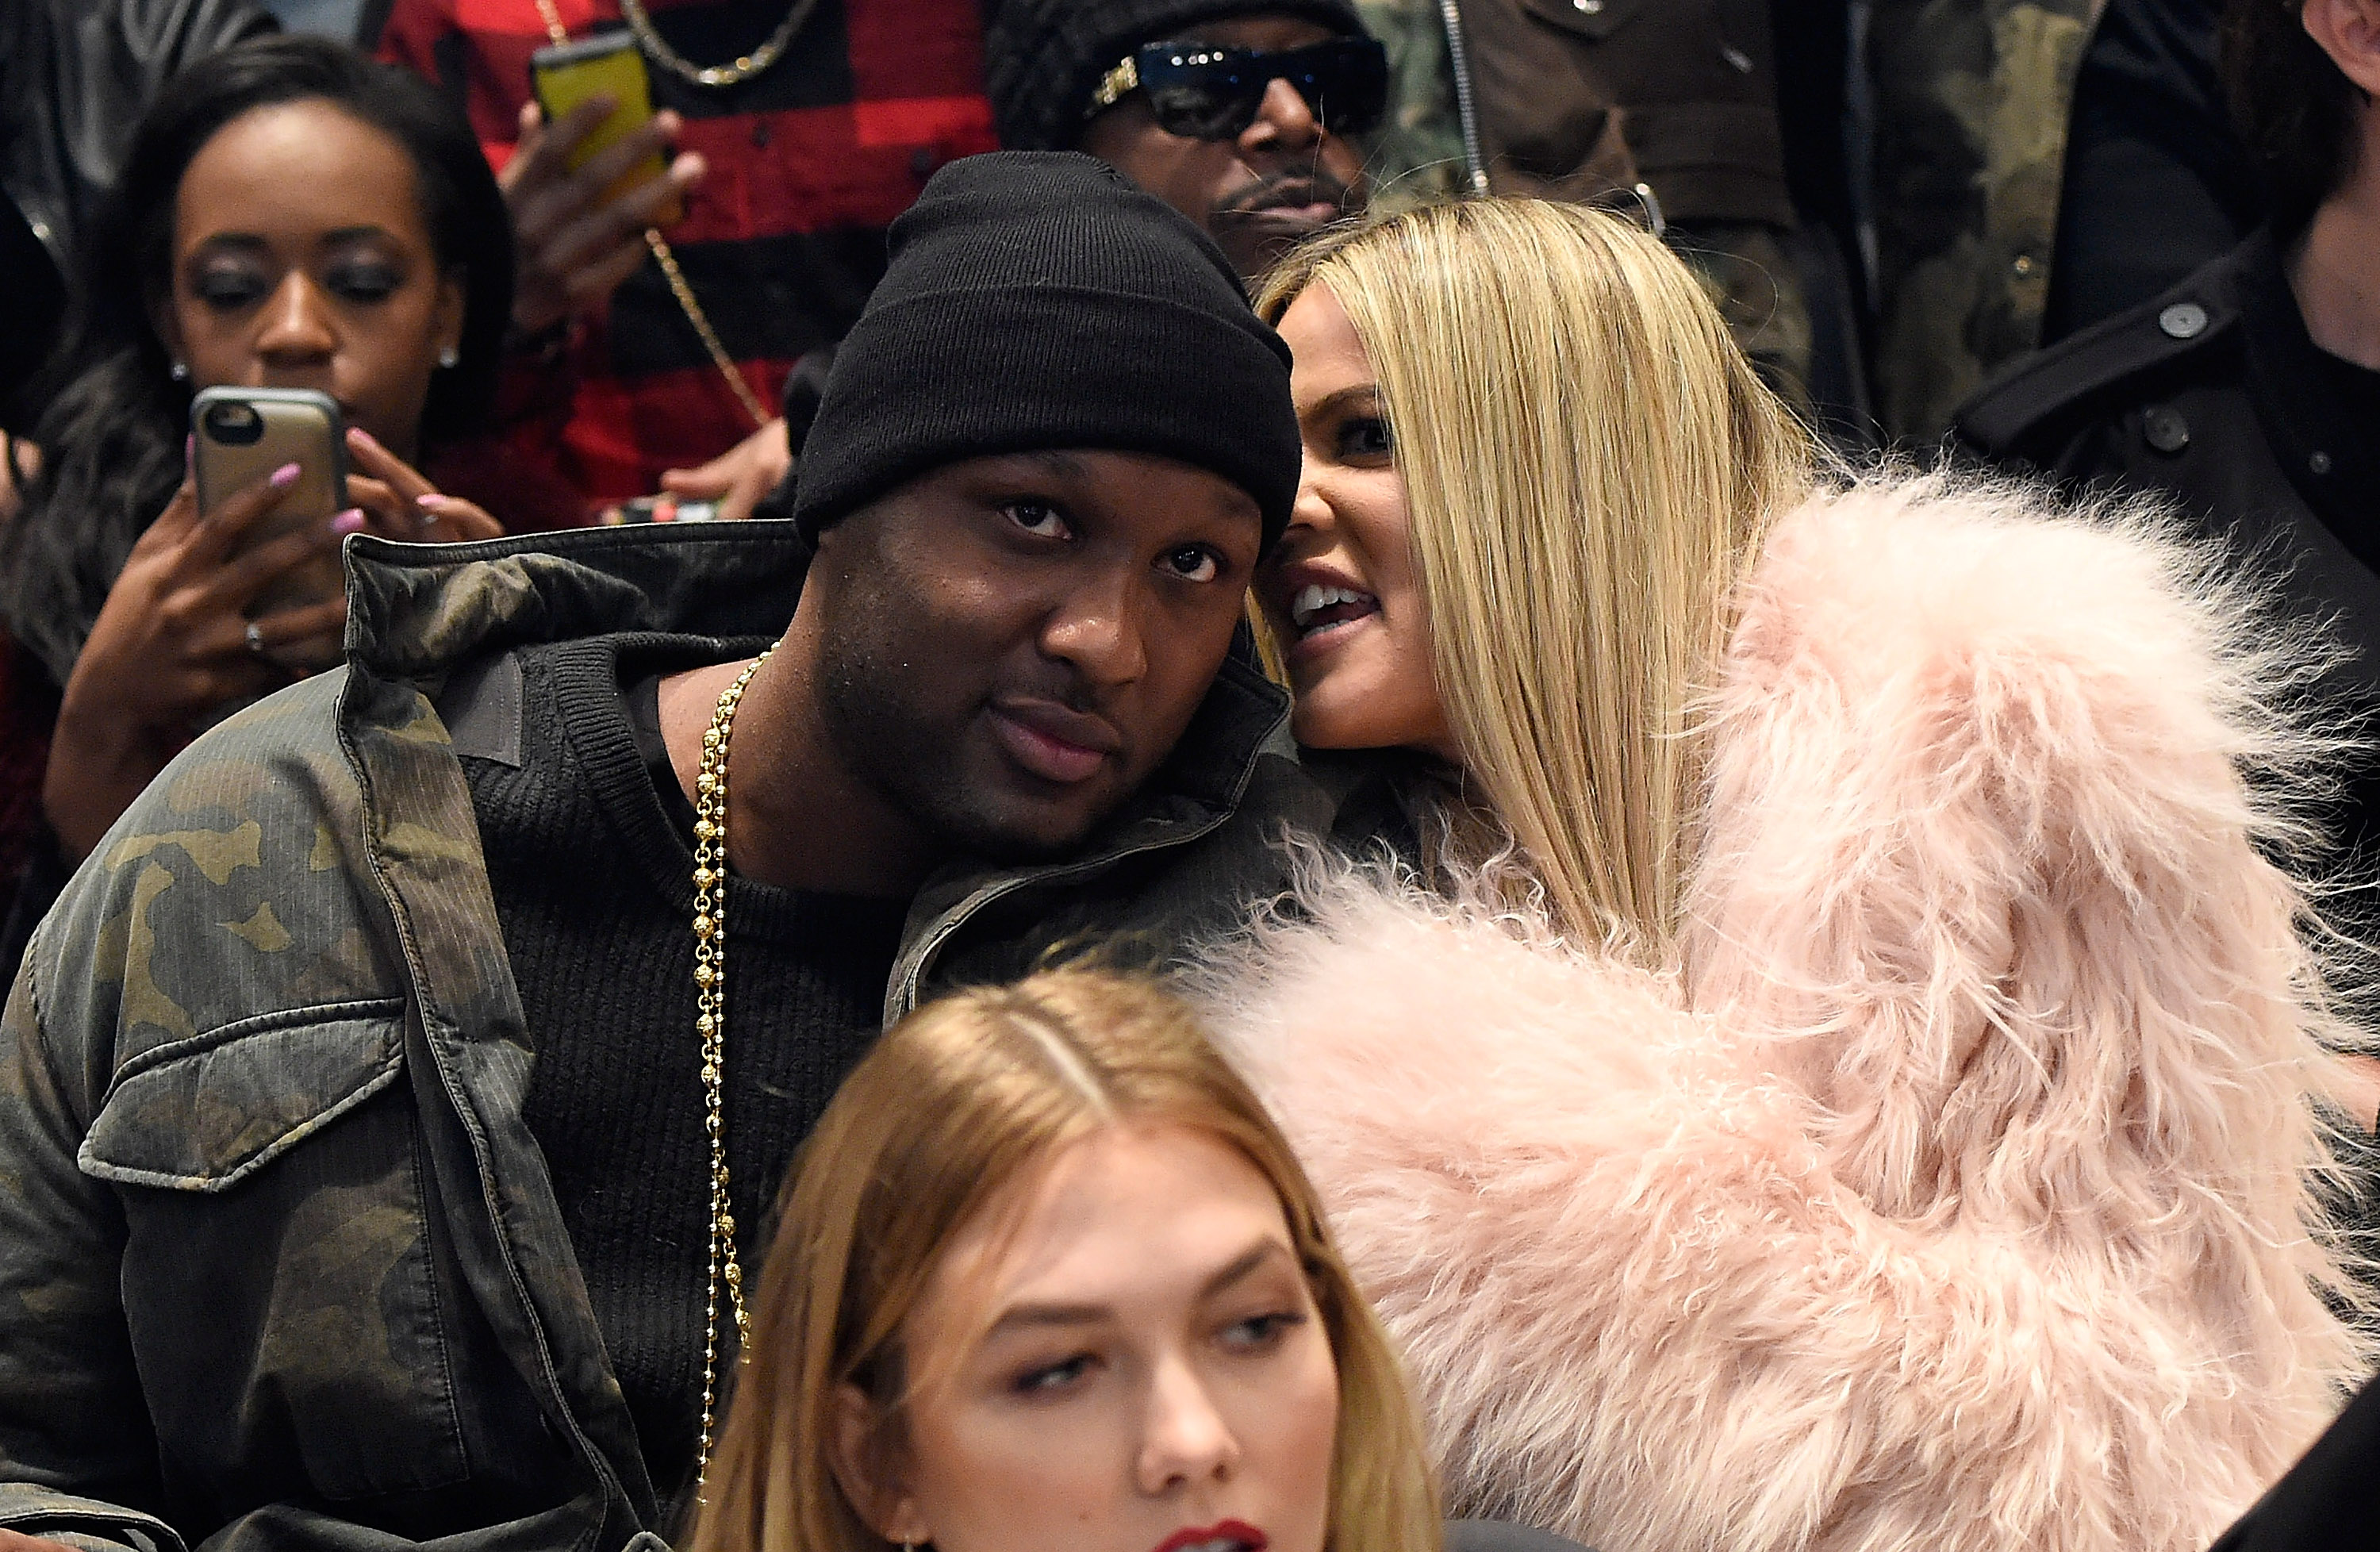 Lamar Odom and Khloe Kardashian attend Kanye West Yeezy Season 3 at Madison Square Garden on February 11, 2016 in New York City. 